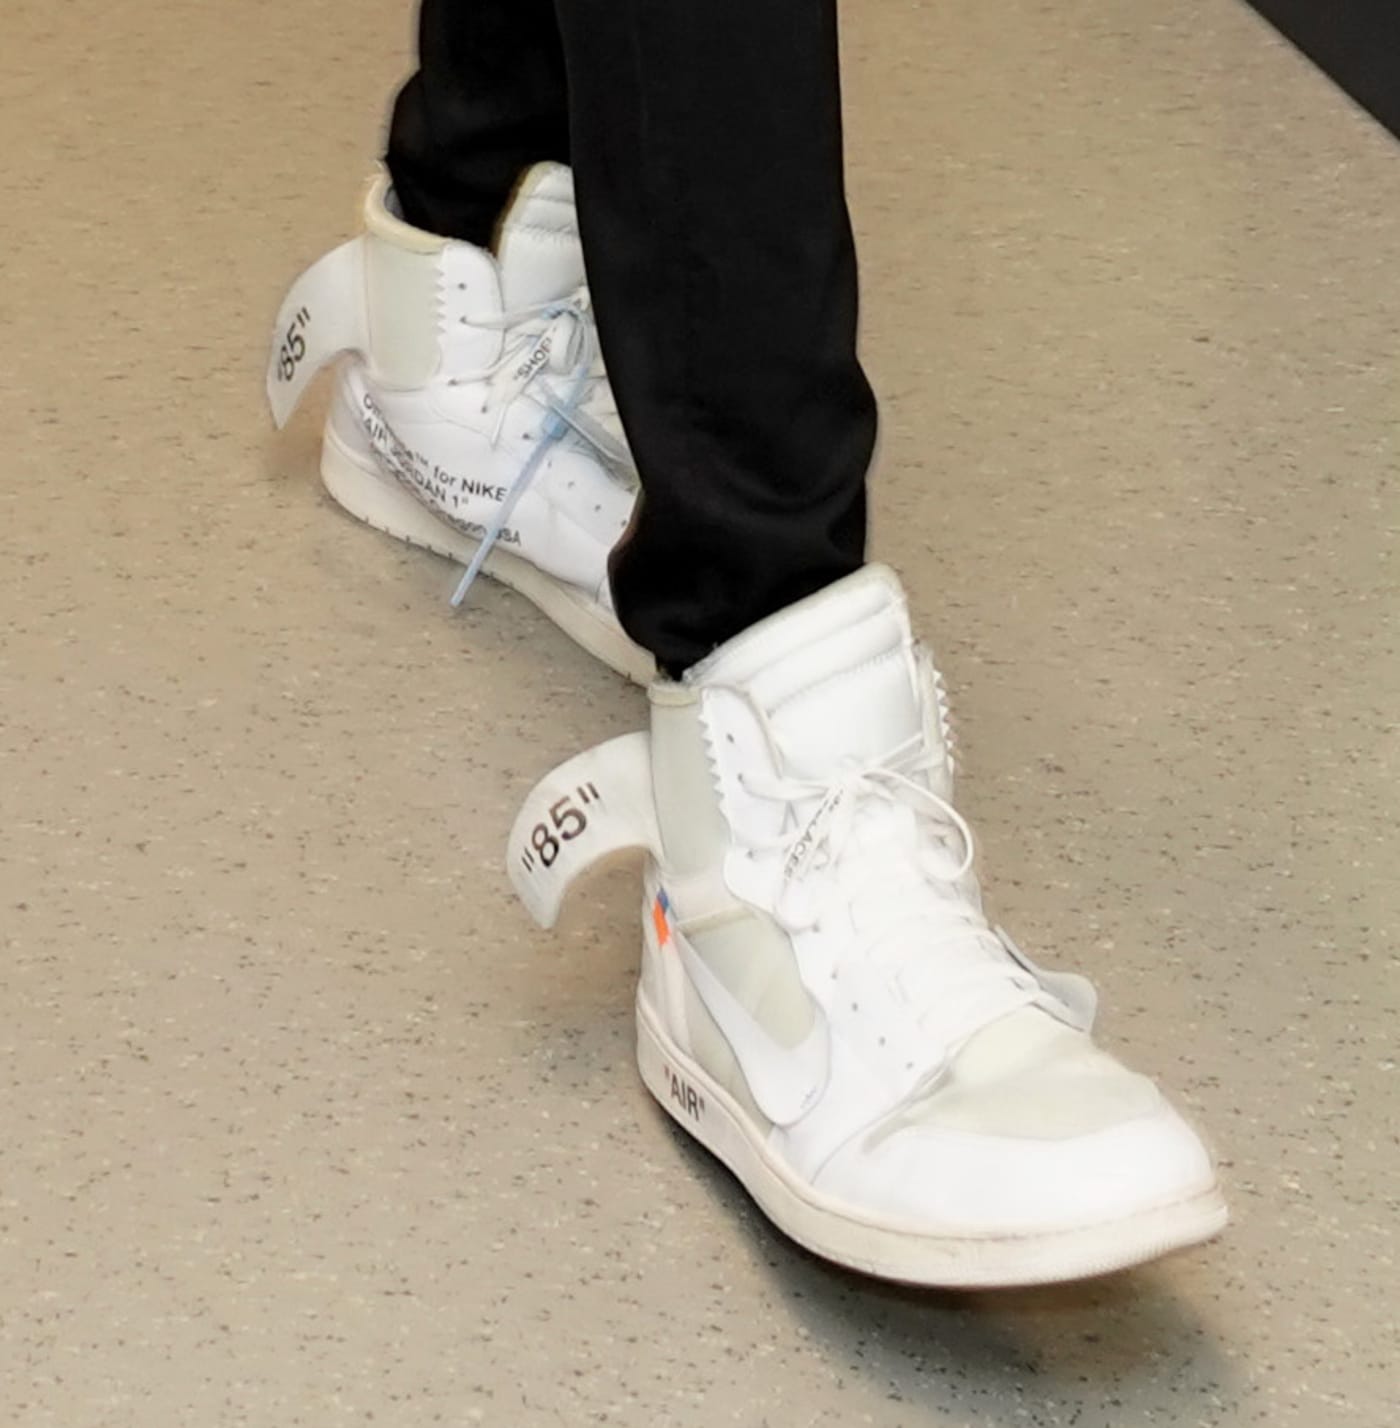 rhythm Print Mount Vesuvius Best Sneakers in the NBA Tunnel This Week: Off-White x Air Jordan V, Don C  x Nike | Complex